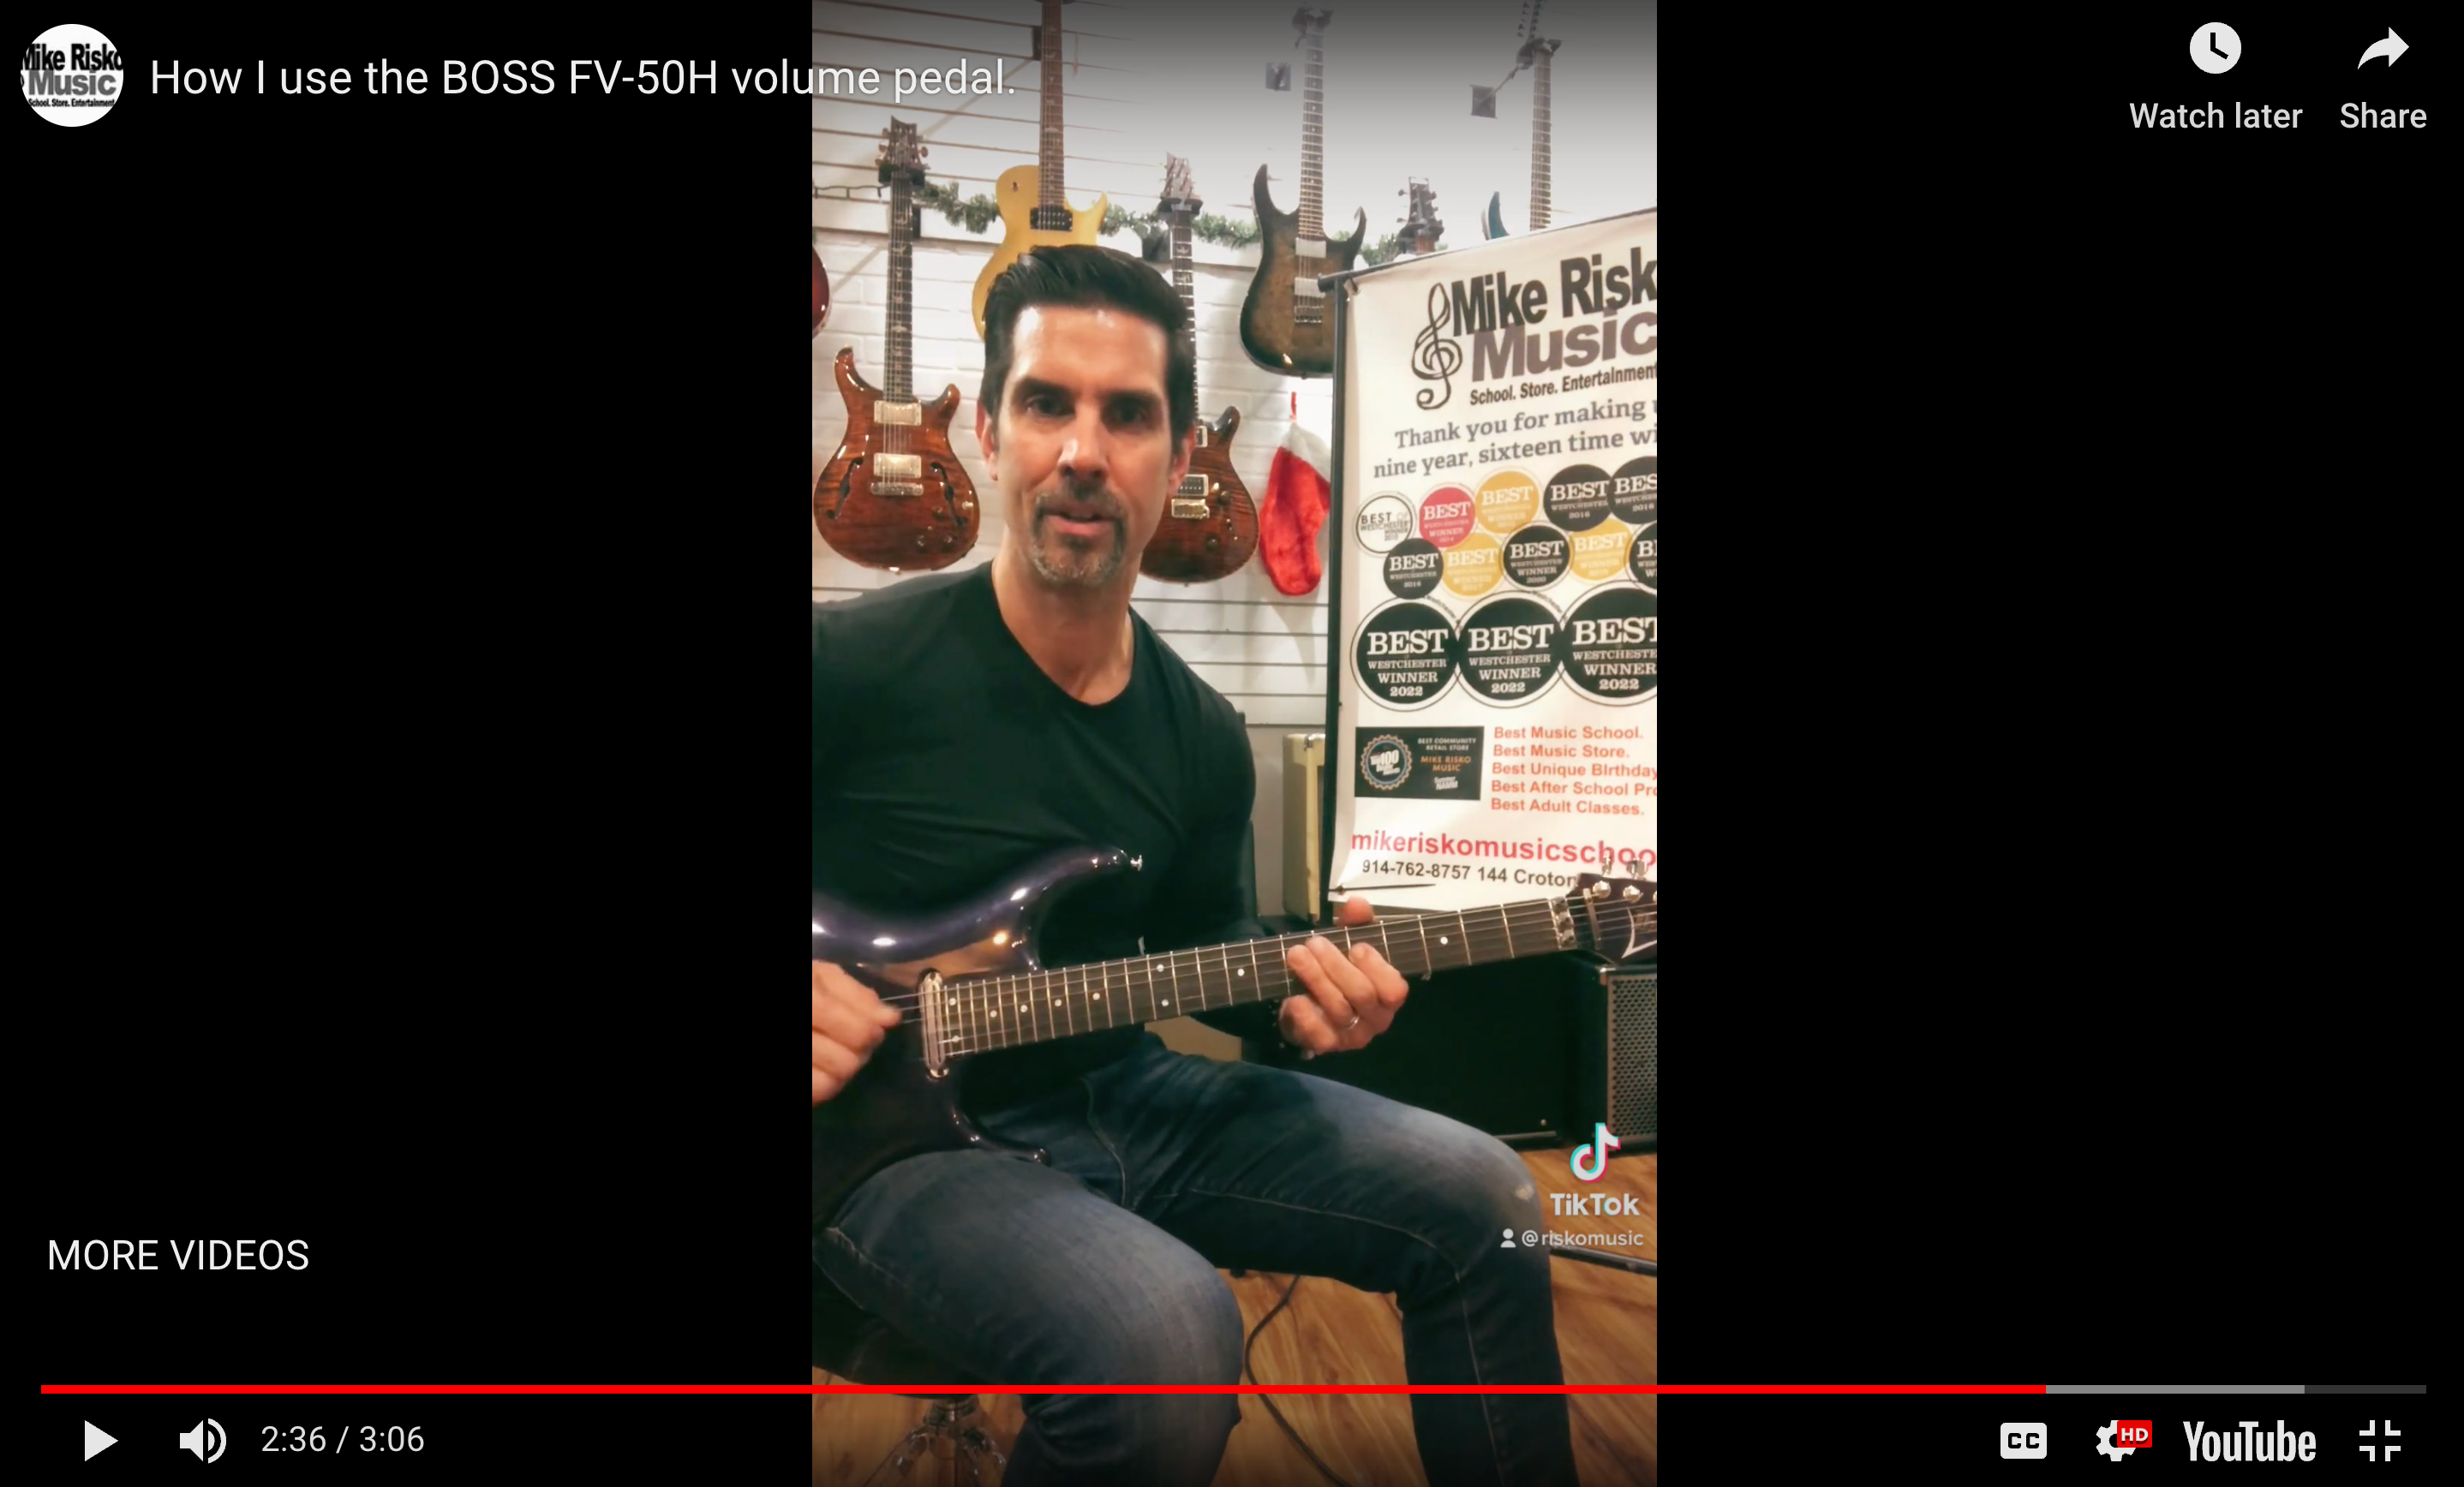 Load video: How I use the BOSS FV-50H volume pedal.